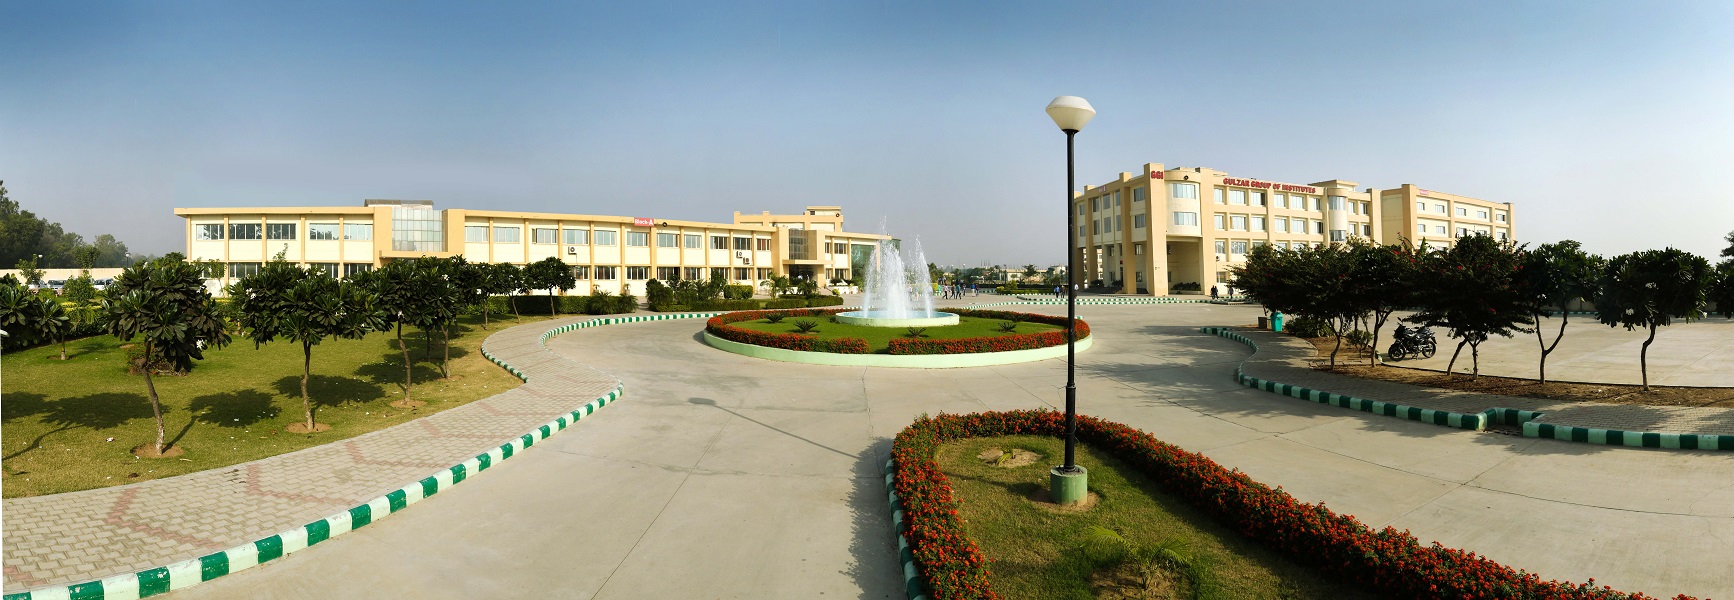 Gulzar Group of Institutions, Ludhiana Image